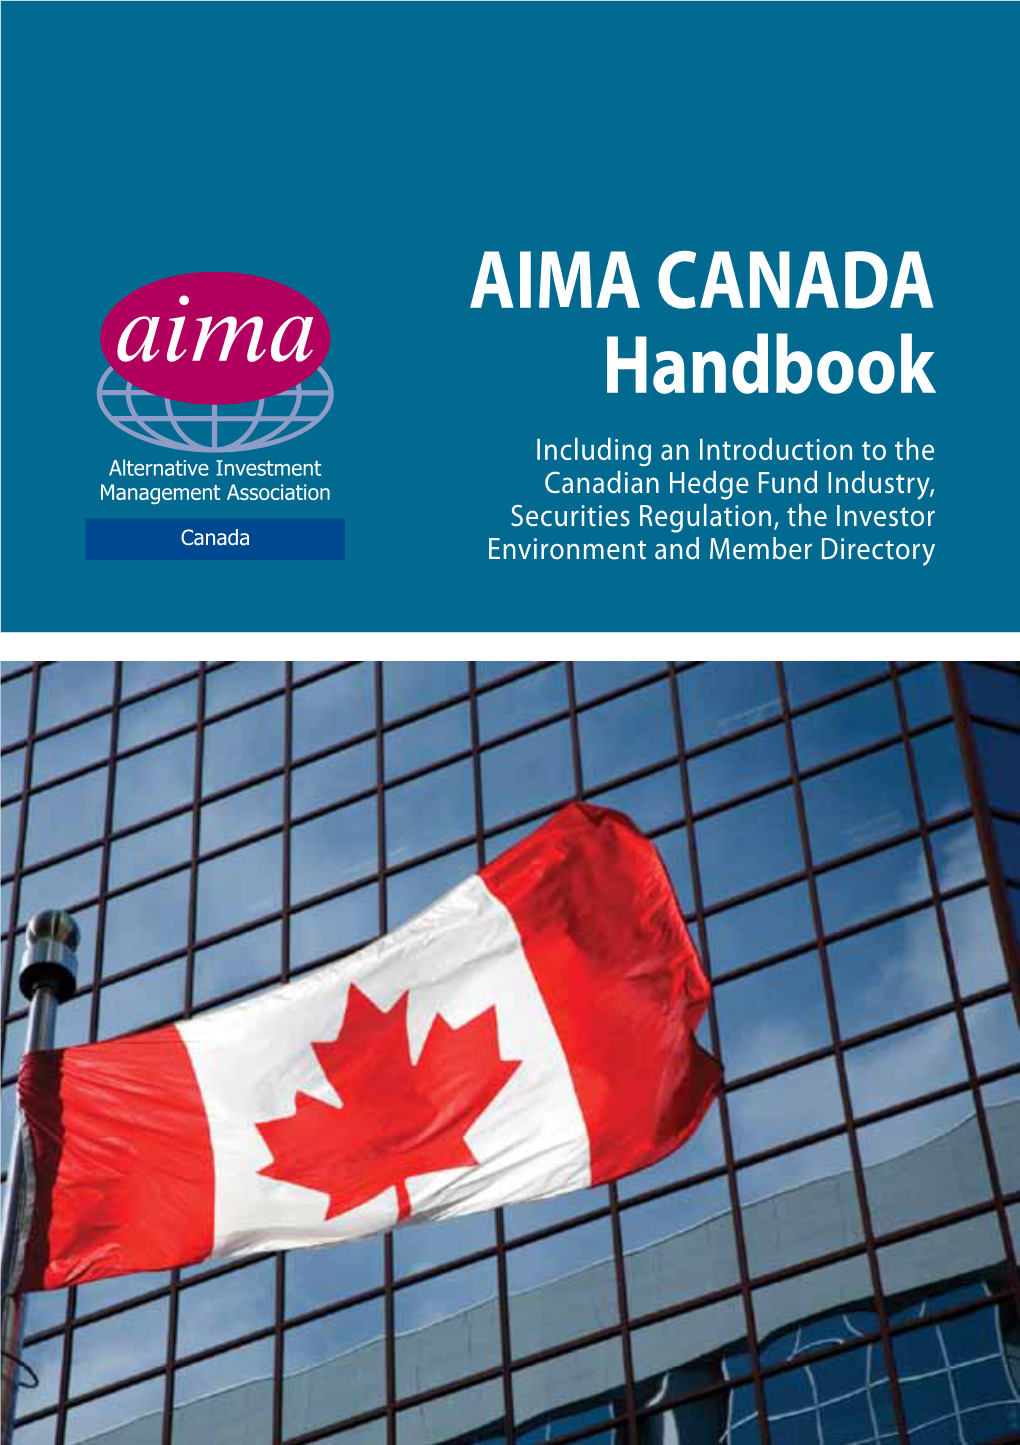 AIMA CANADA Handbook Including an Introduction to the Canadian Hedge Fund Industry, Securities Regulation, the Investor Environment and Member Directory DISCLAIMER